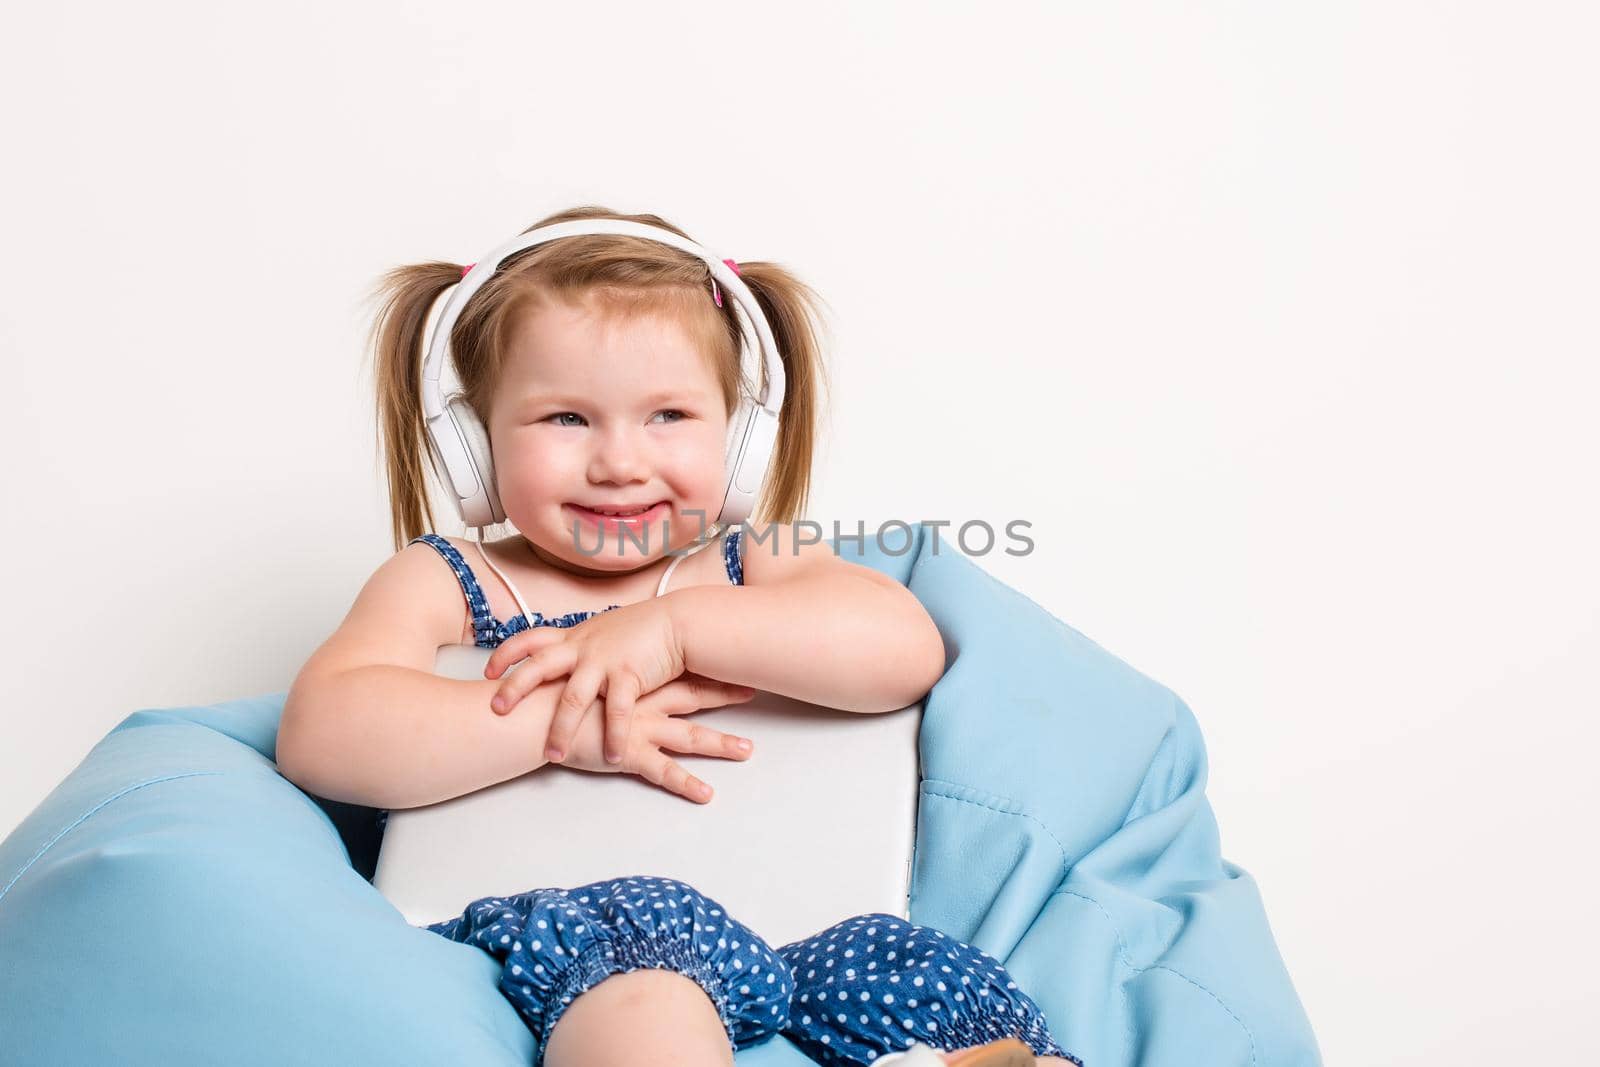 Cute little girl in headphones listening to music using a tablet and smiling while sitting on blue big bag. On white background. A child looks at the camera